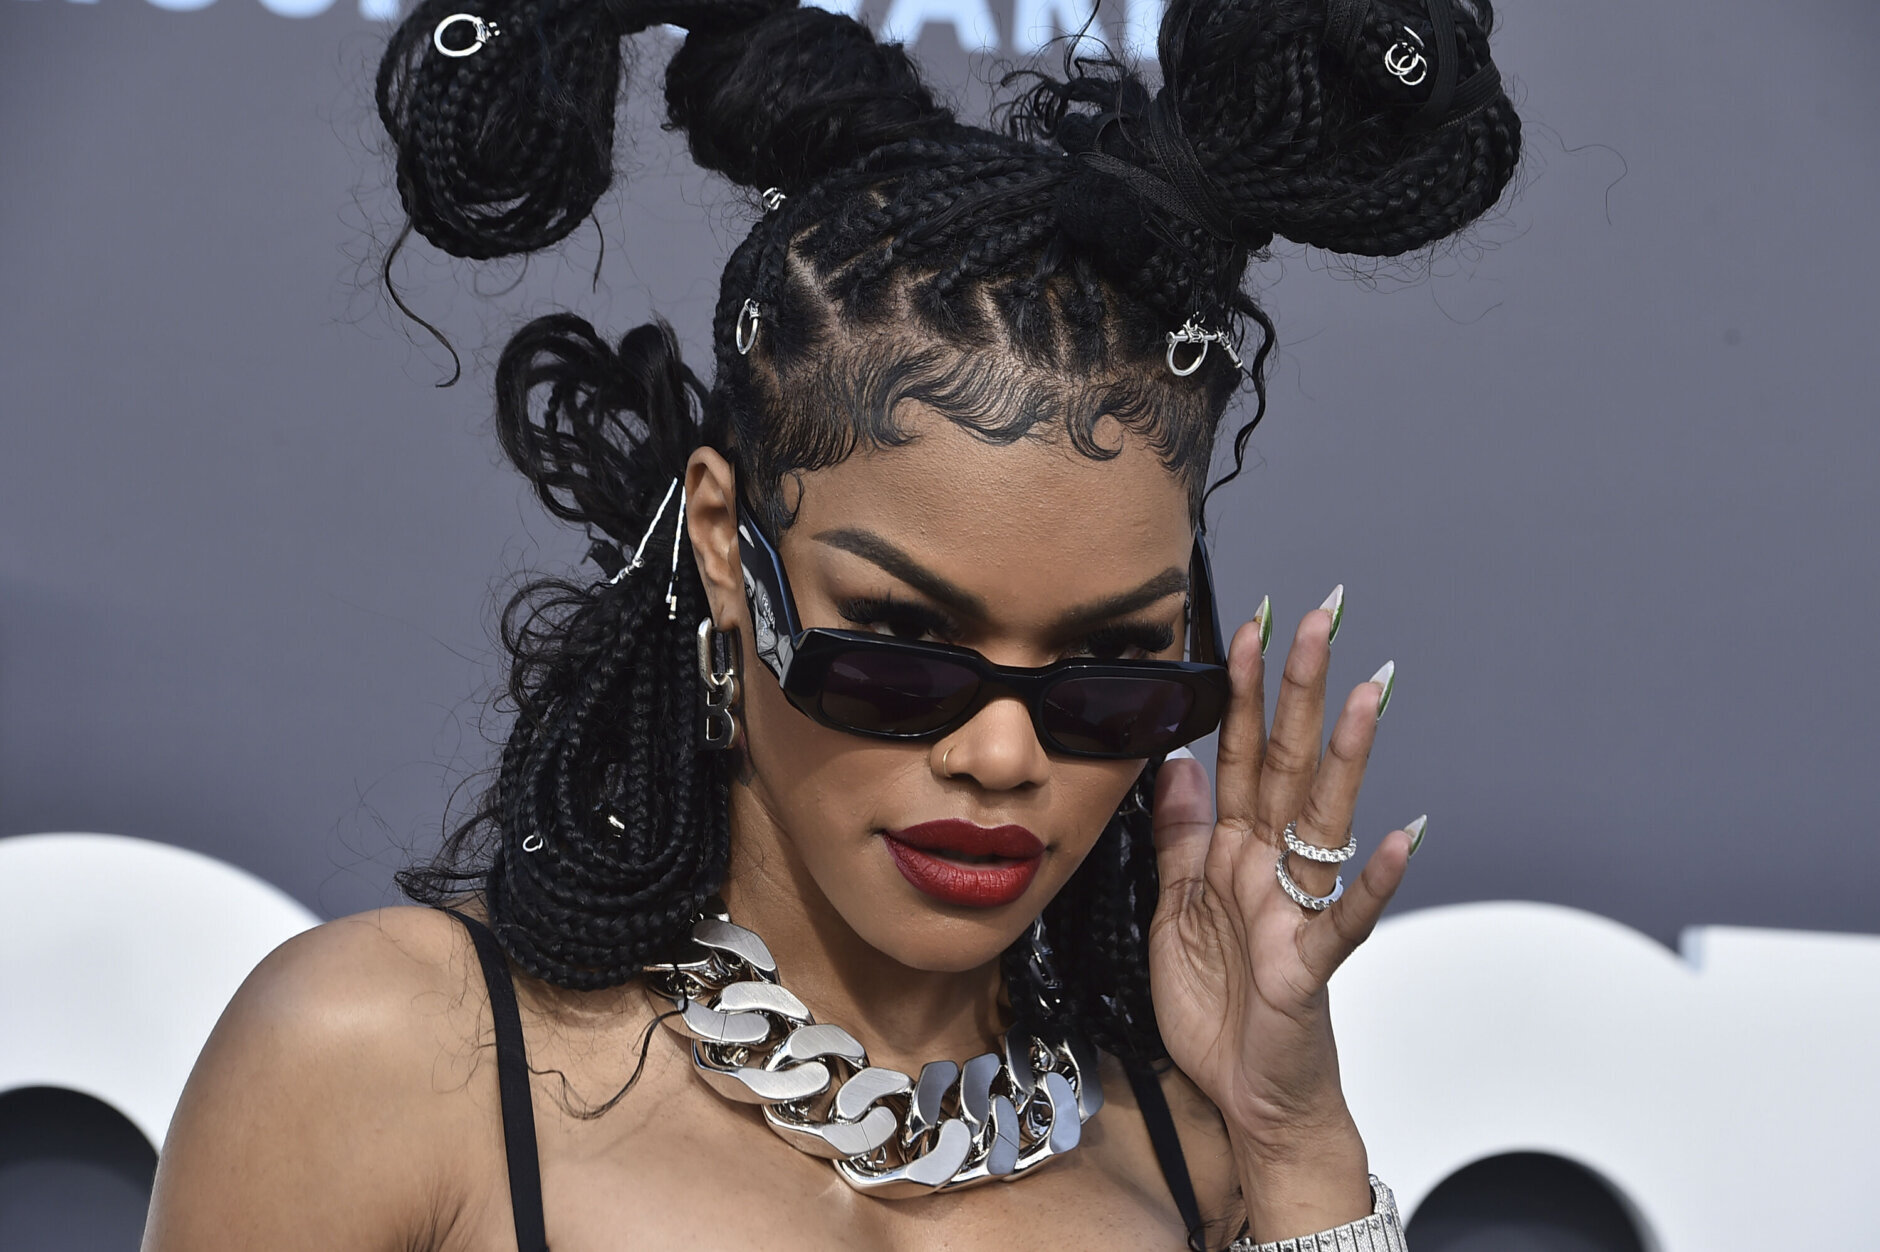 Teyana Taylor arrives at the Billboard Music Awards on Sunday, May 15, 2022, at the MGM Grand Garden Arena in Las Vegas. (Photo by Jordan Strauss/Invision/AP)